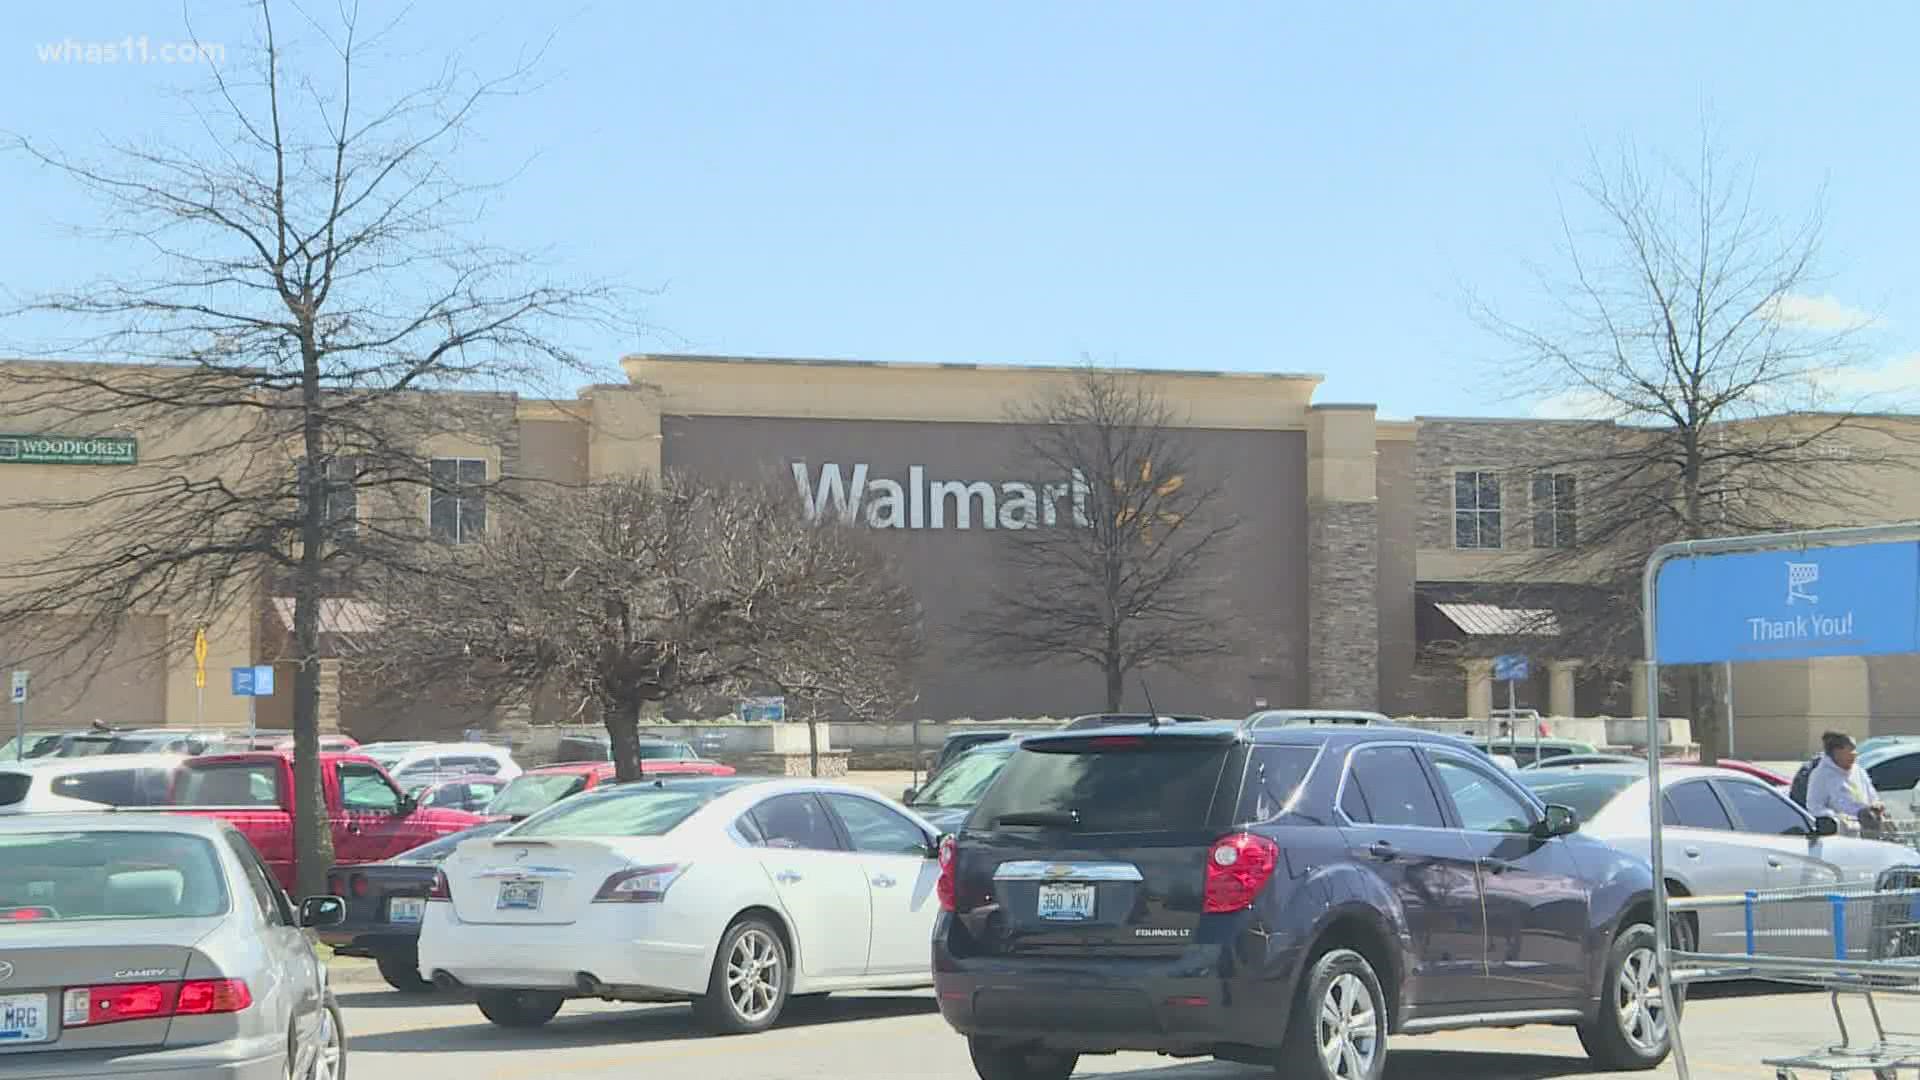 Nearby businesses and shoppers who frequent the Walmart on Raggard Road are thinking of what to do next. The store closes in April.